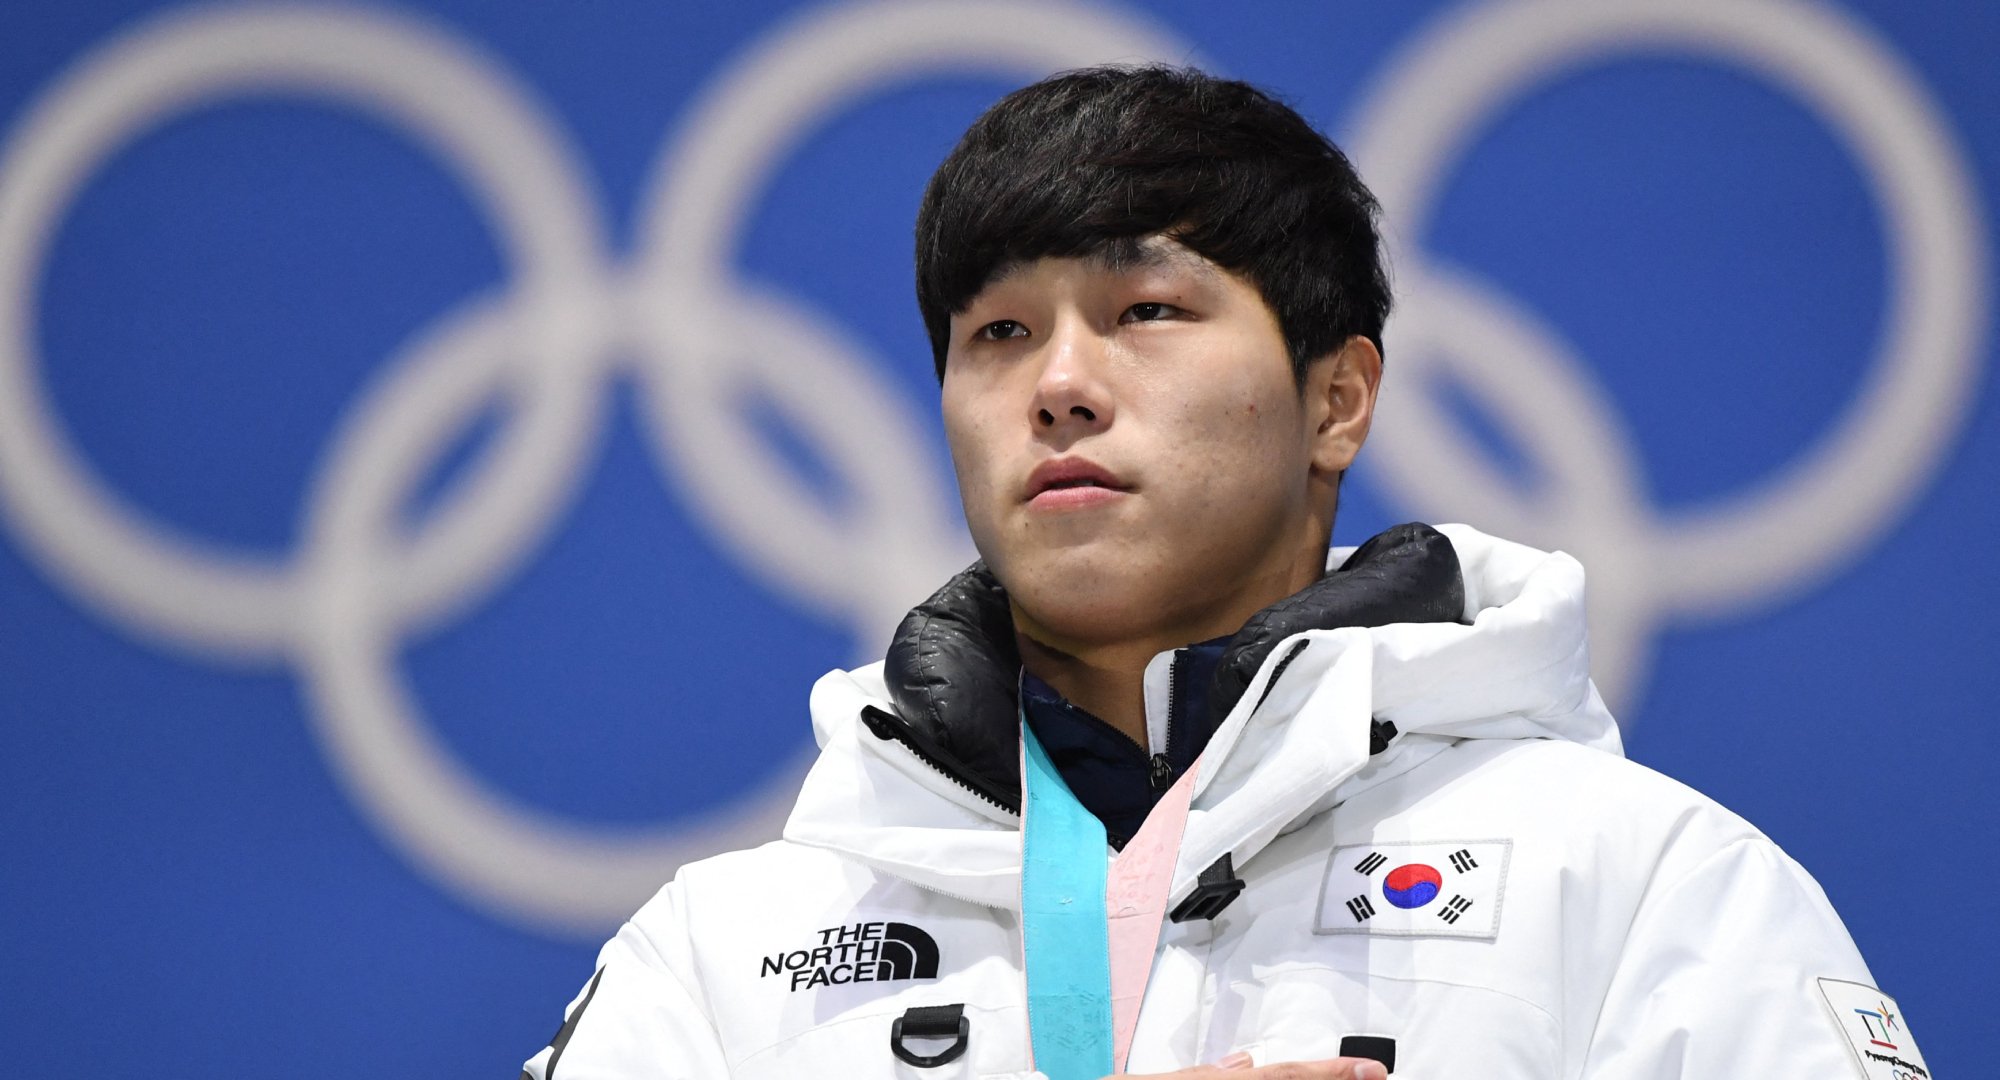 'Physical 100' contestant Yun Sung-bin at the 2018 Winter Olympic Games.